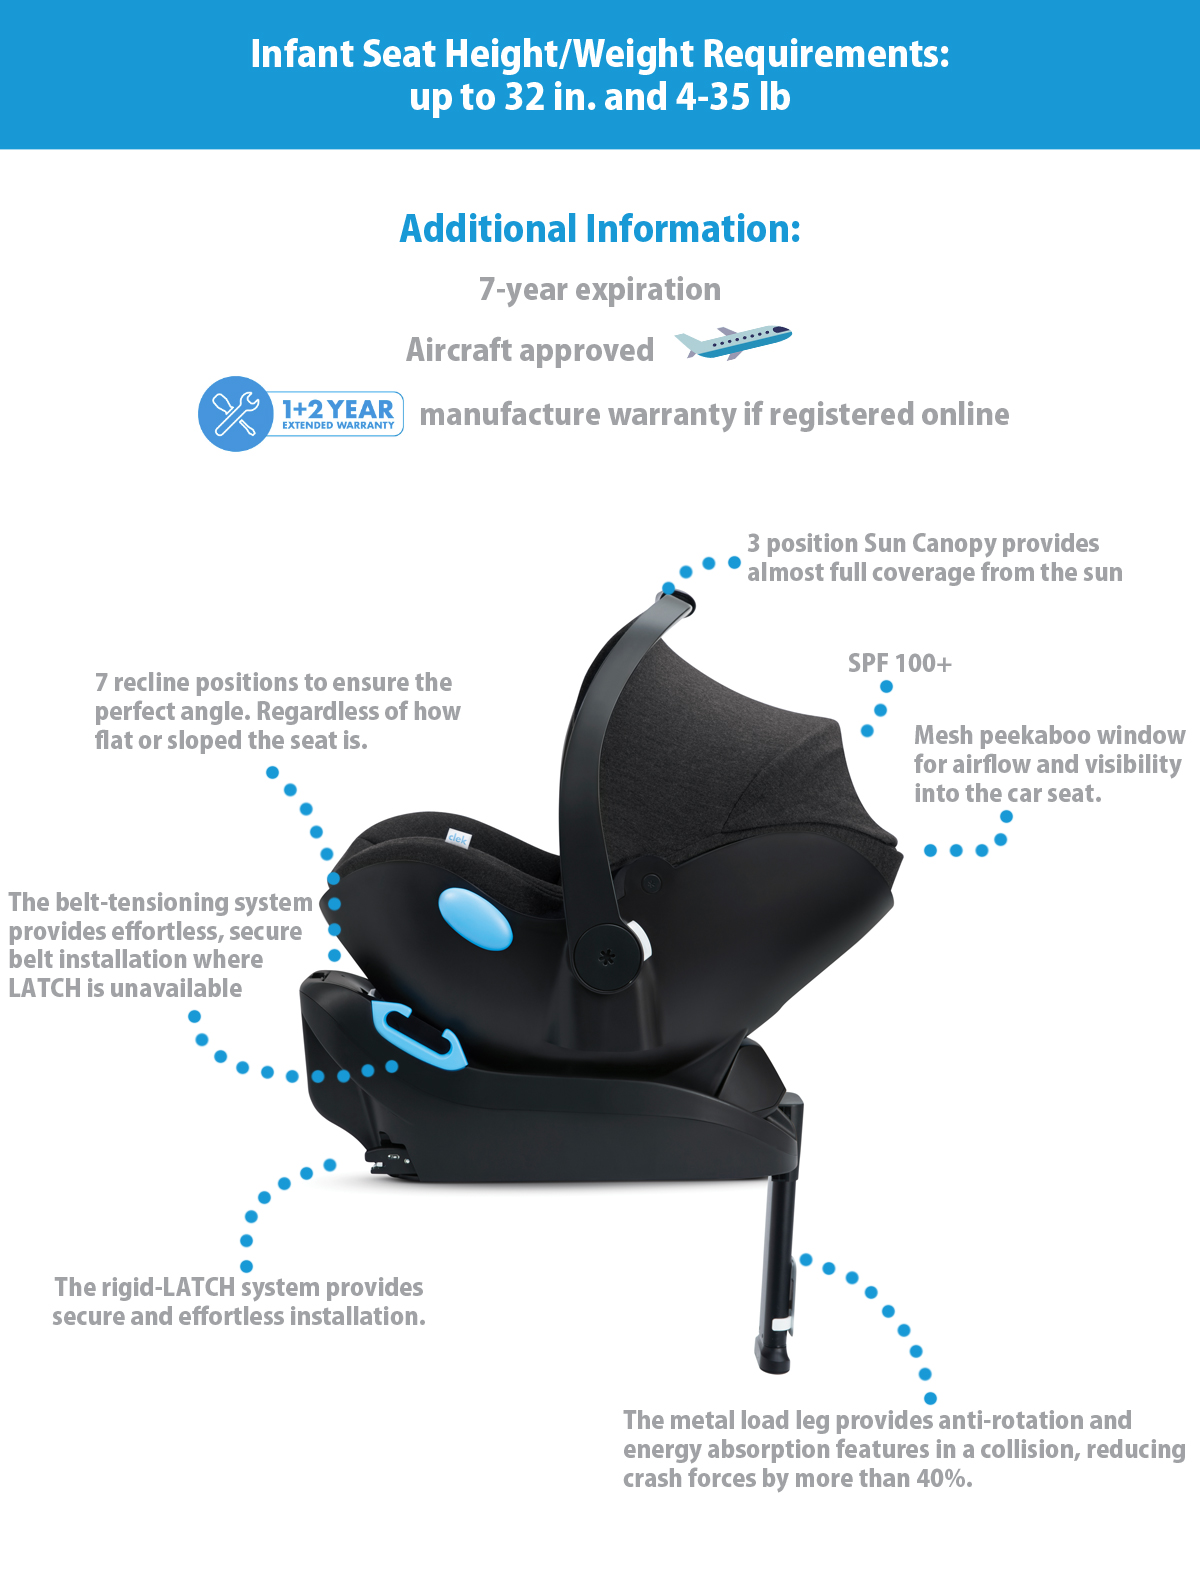 the Clek Liing car seat details, height and weight requirements